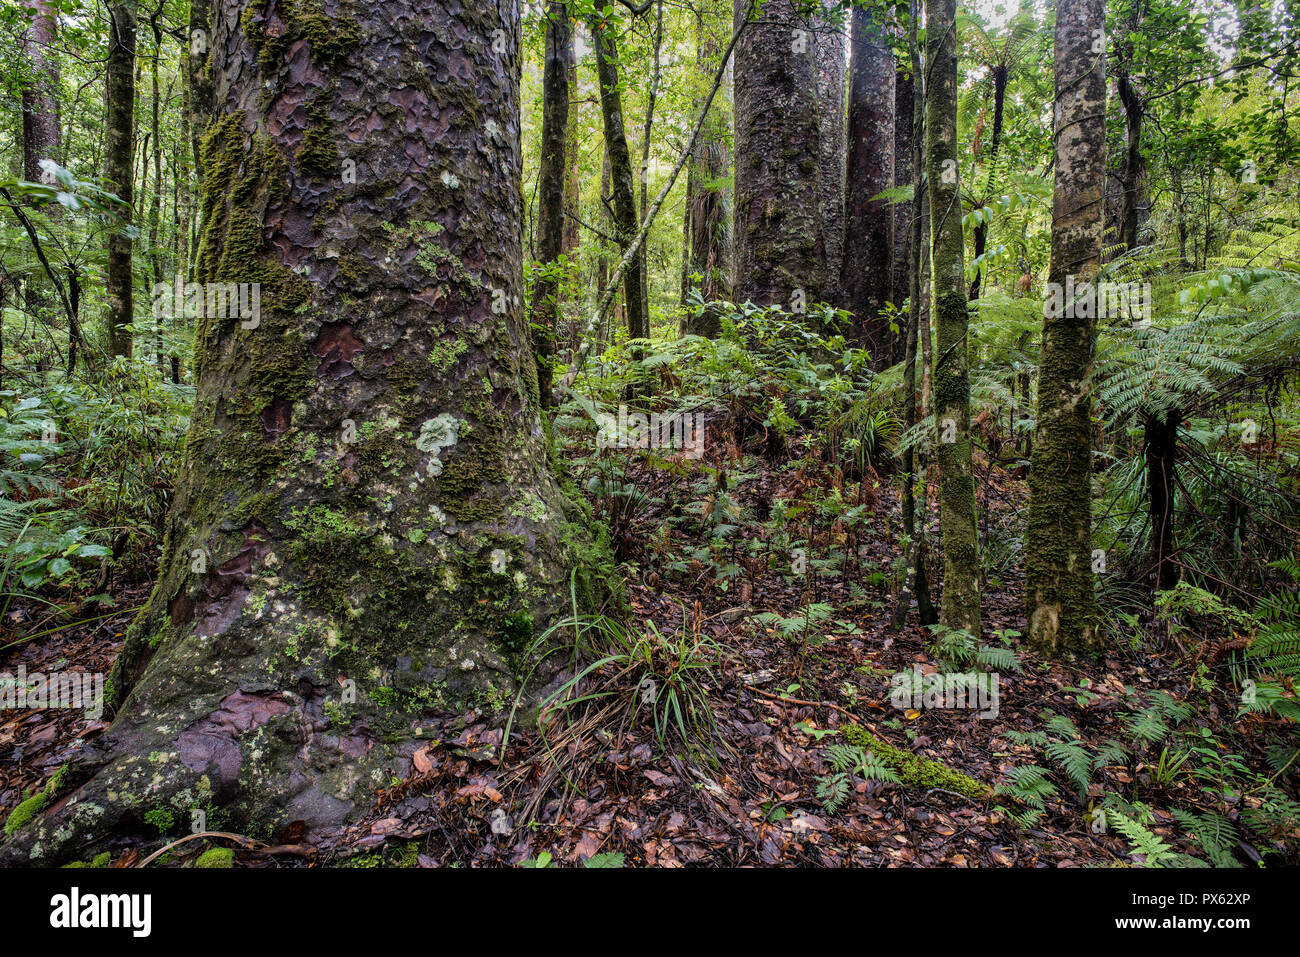 Old-growth forest of New Zealand kauri trees (Agathis australis), ferns, and bromeliads in the Waipoua Forest in Northland, New Zealand. Kauri trees a Stock Photo